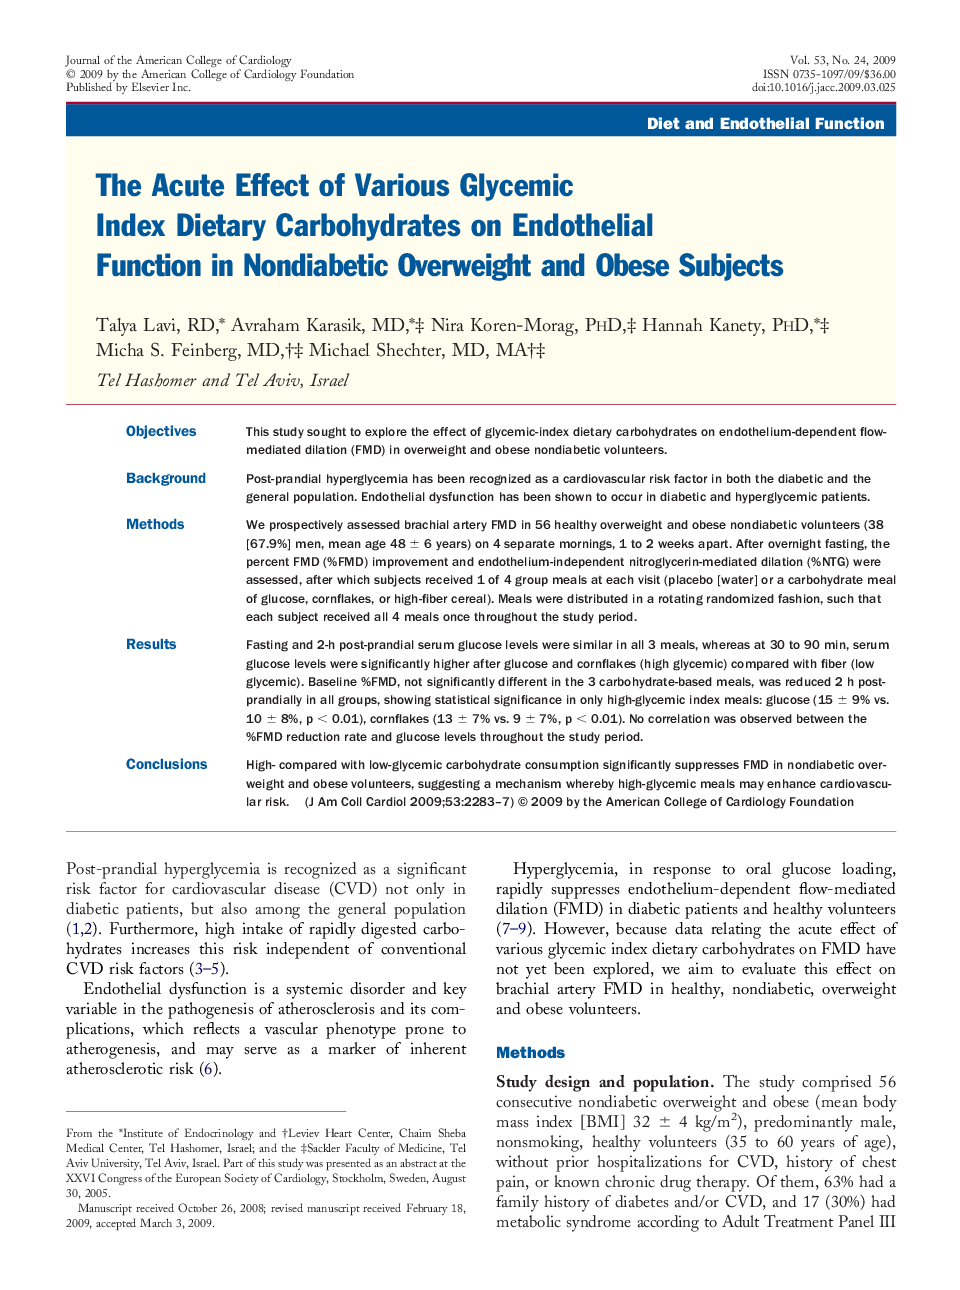 The Acute Effect of Various Glycemic Index Dietary Carbohydrates on Endothelial Function in Nondiabetic Overweight and Obese Subjects